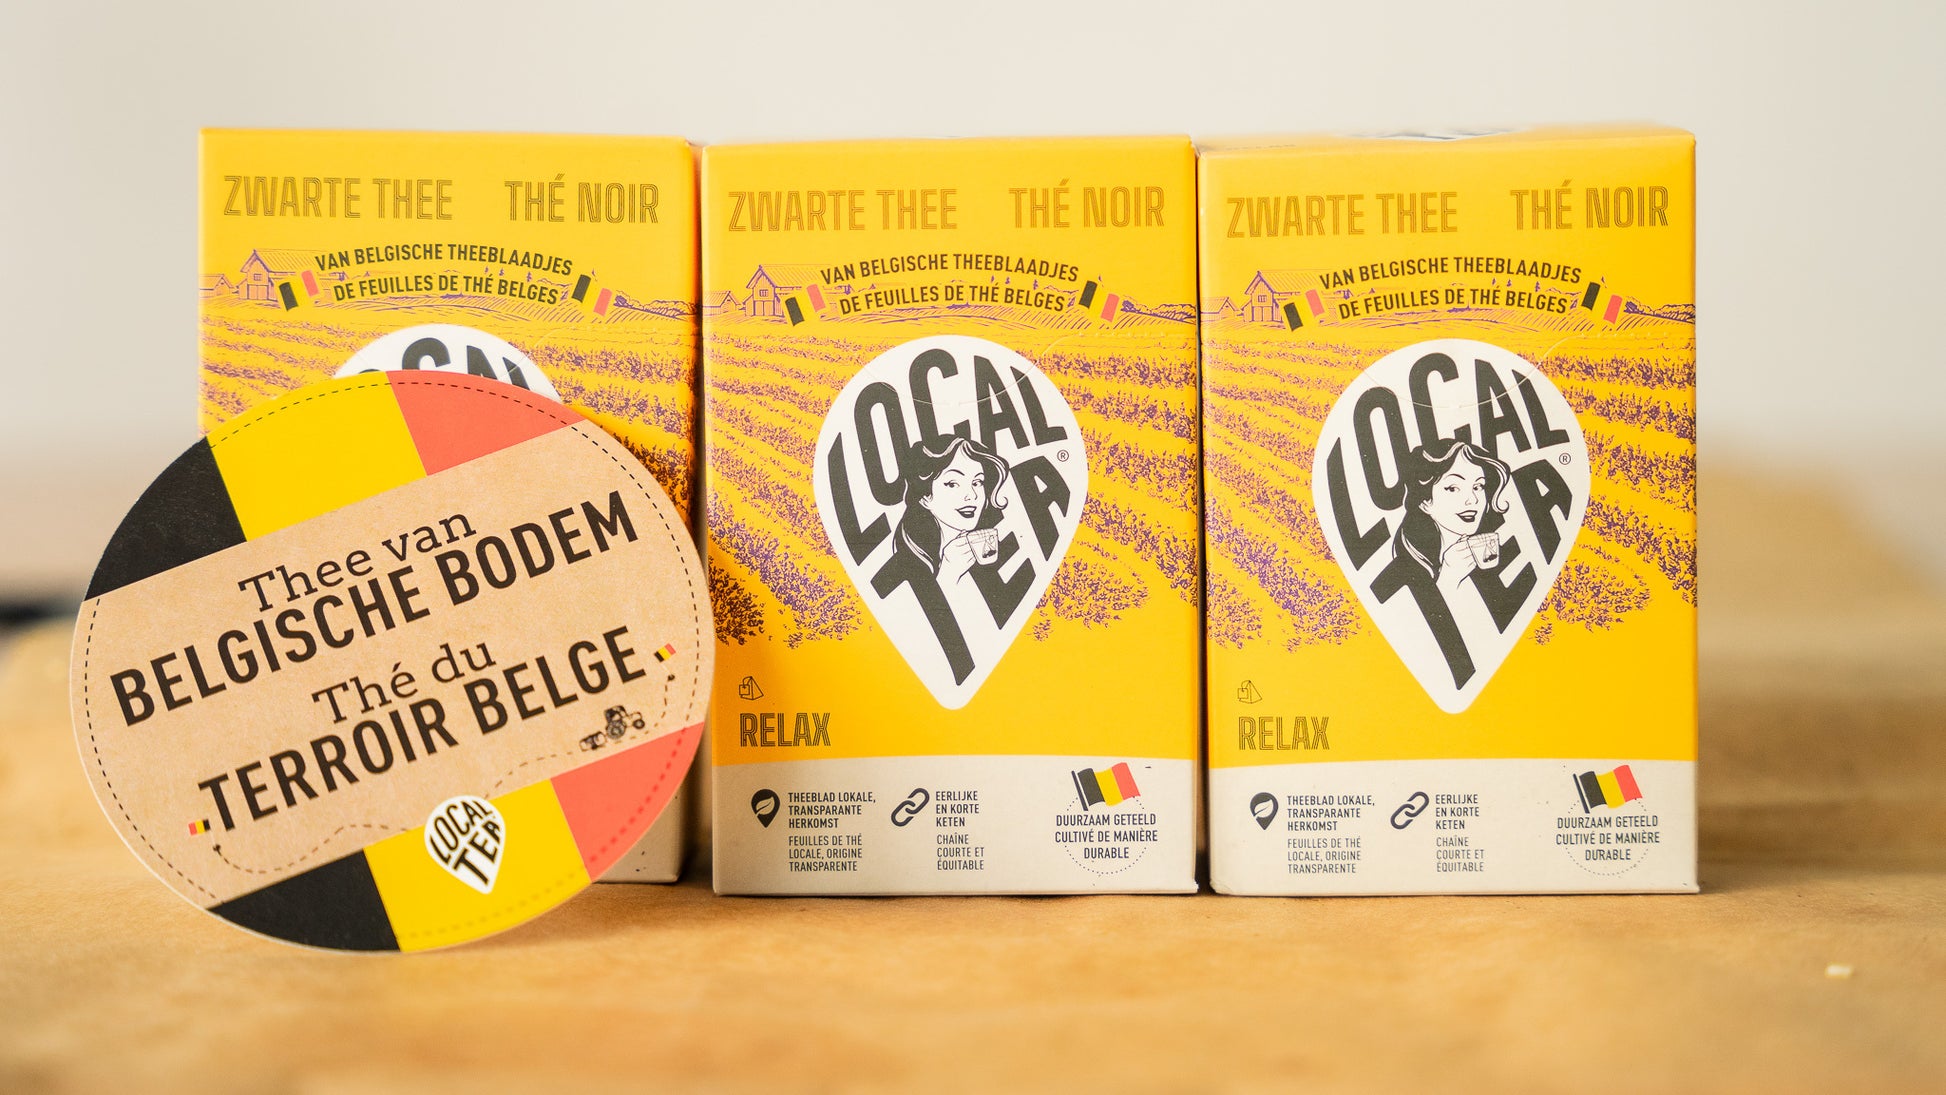 Three lavender-black tea packages placed next to each other with the writing "Tea from Belgian territory".